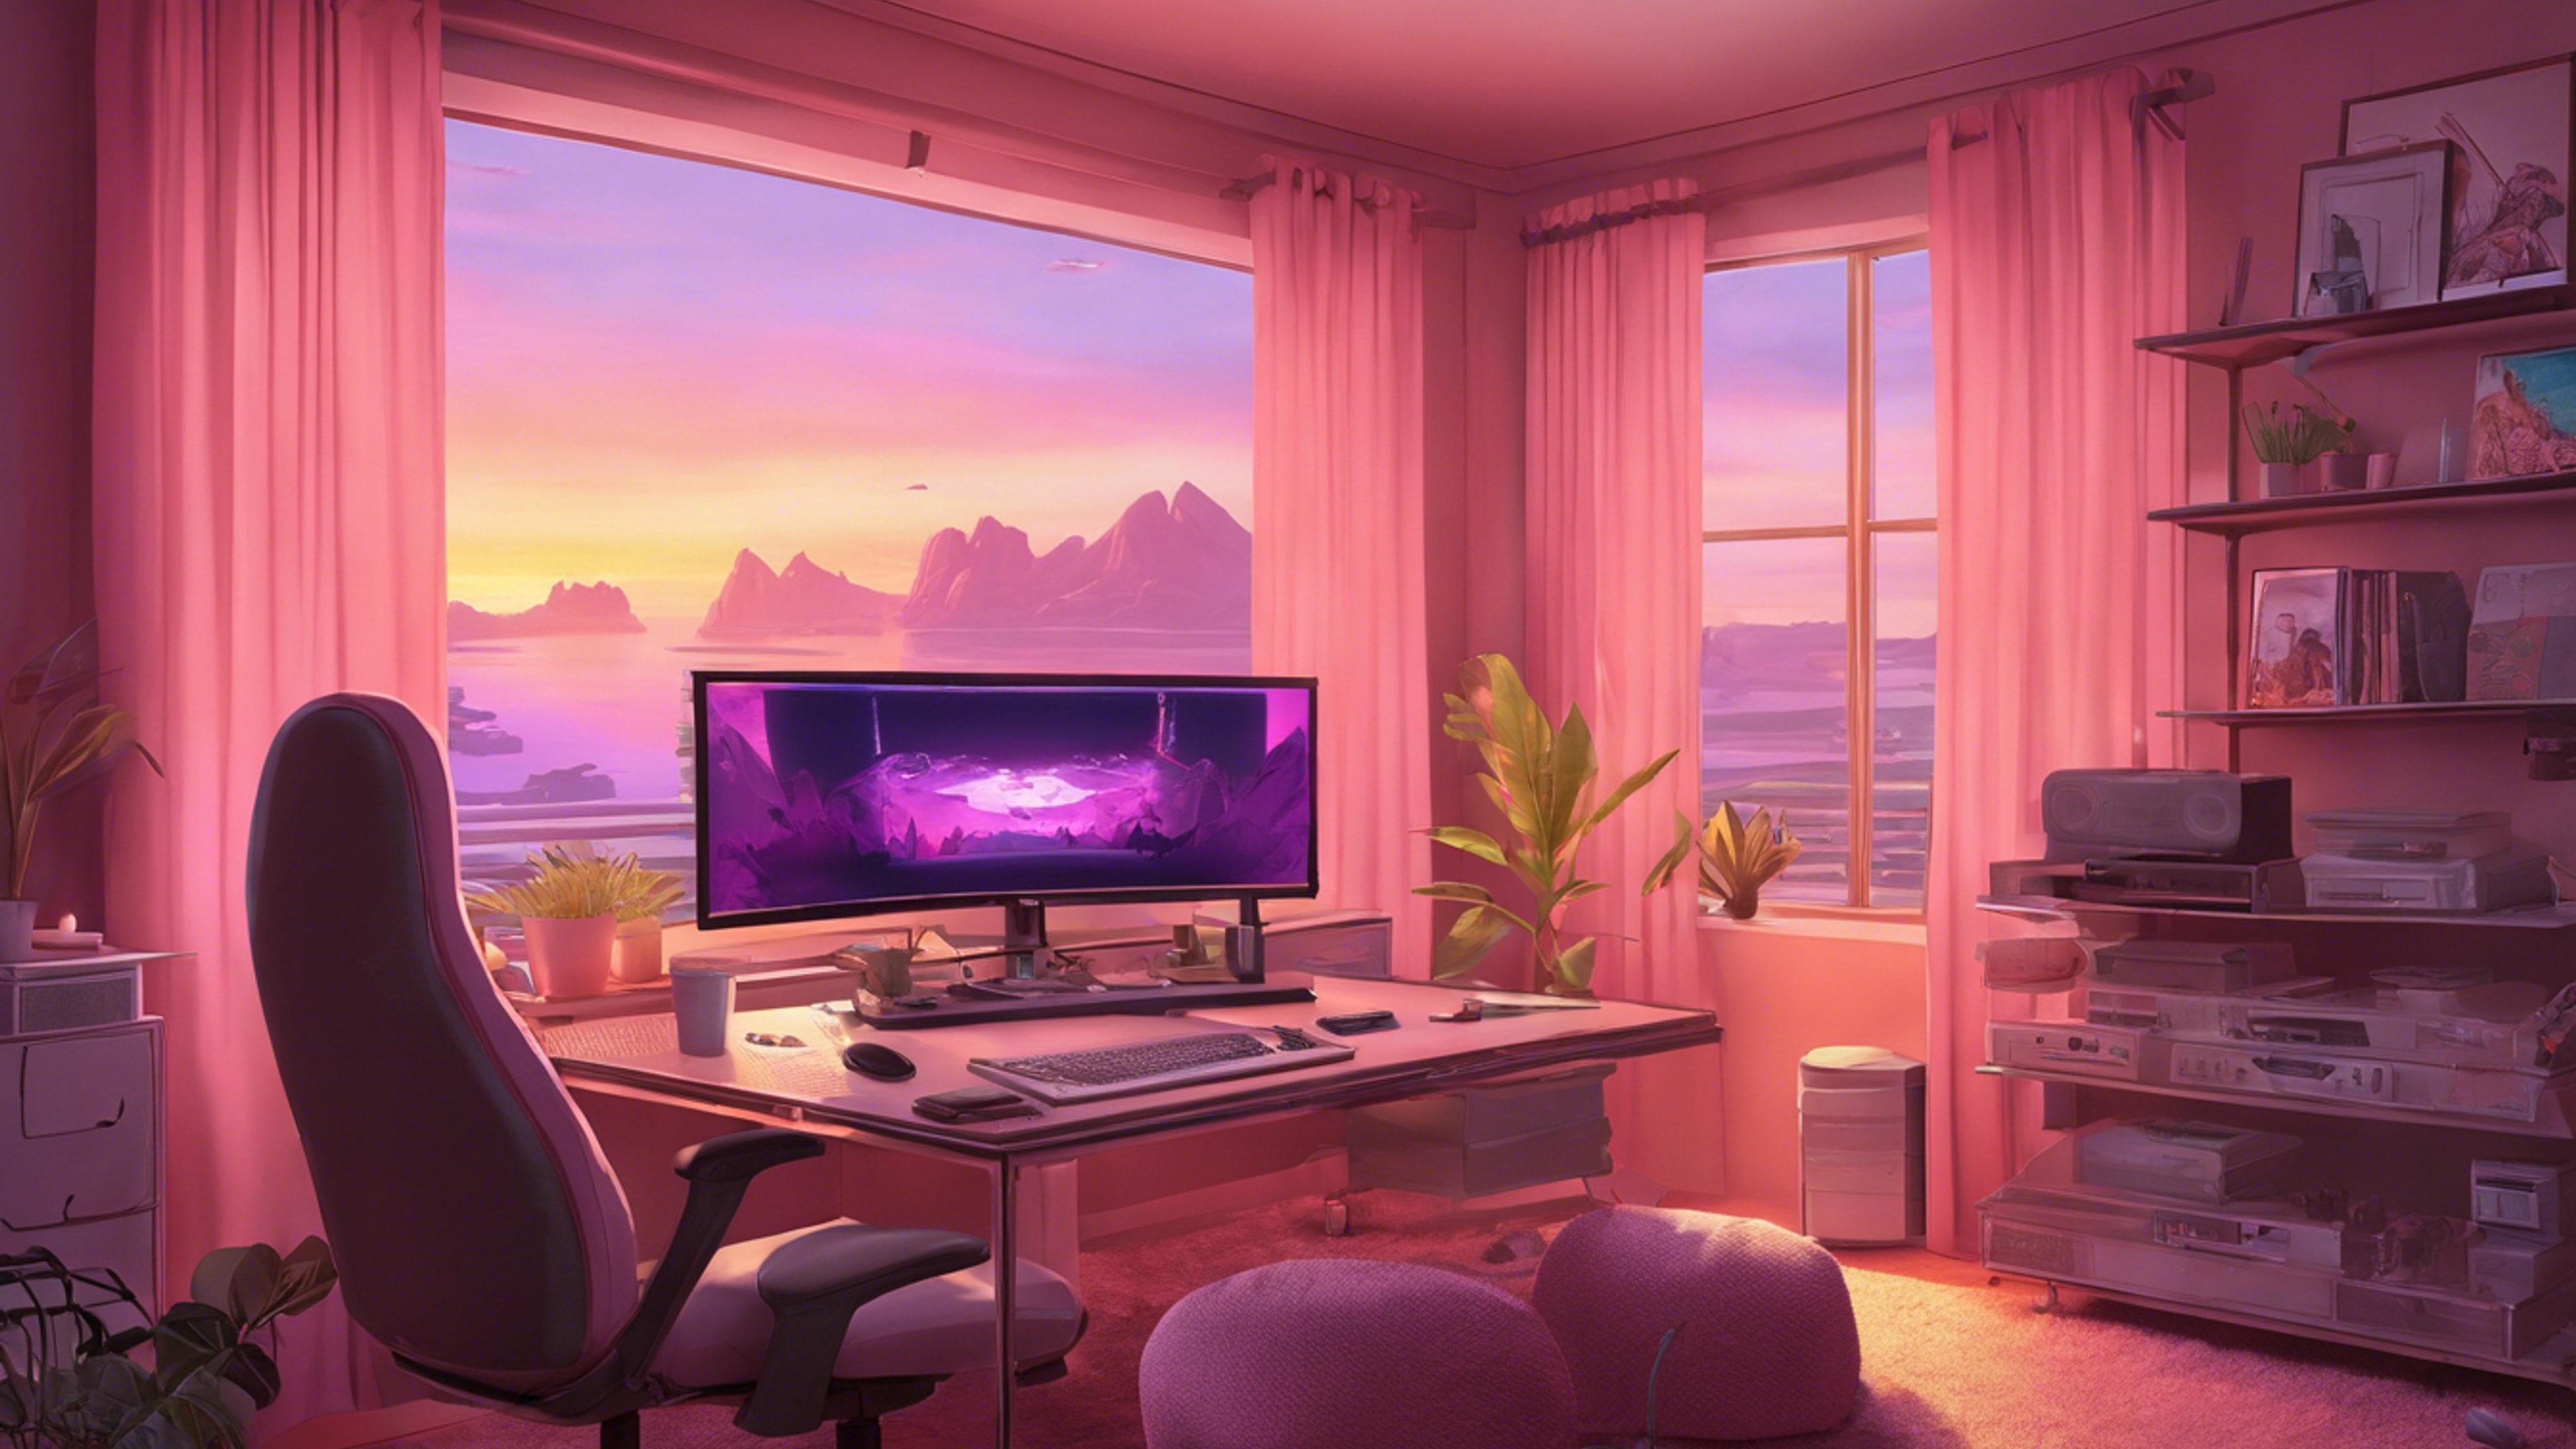 A beautiful shot of a gaming room at dusk with pastel pink curtains slightly drawn, allowing soft sunset hues to blend with the gaming setup's ambient light. Обои[98f2c4ff56214265aa5c]